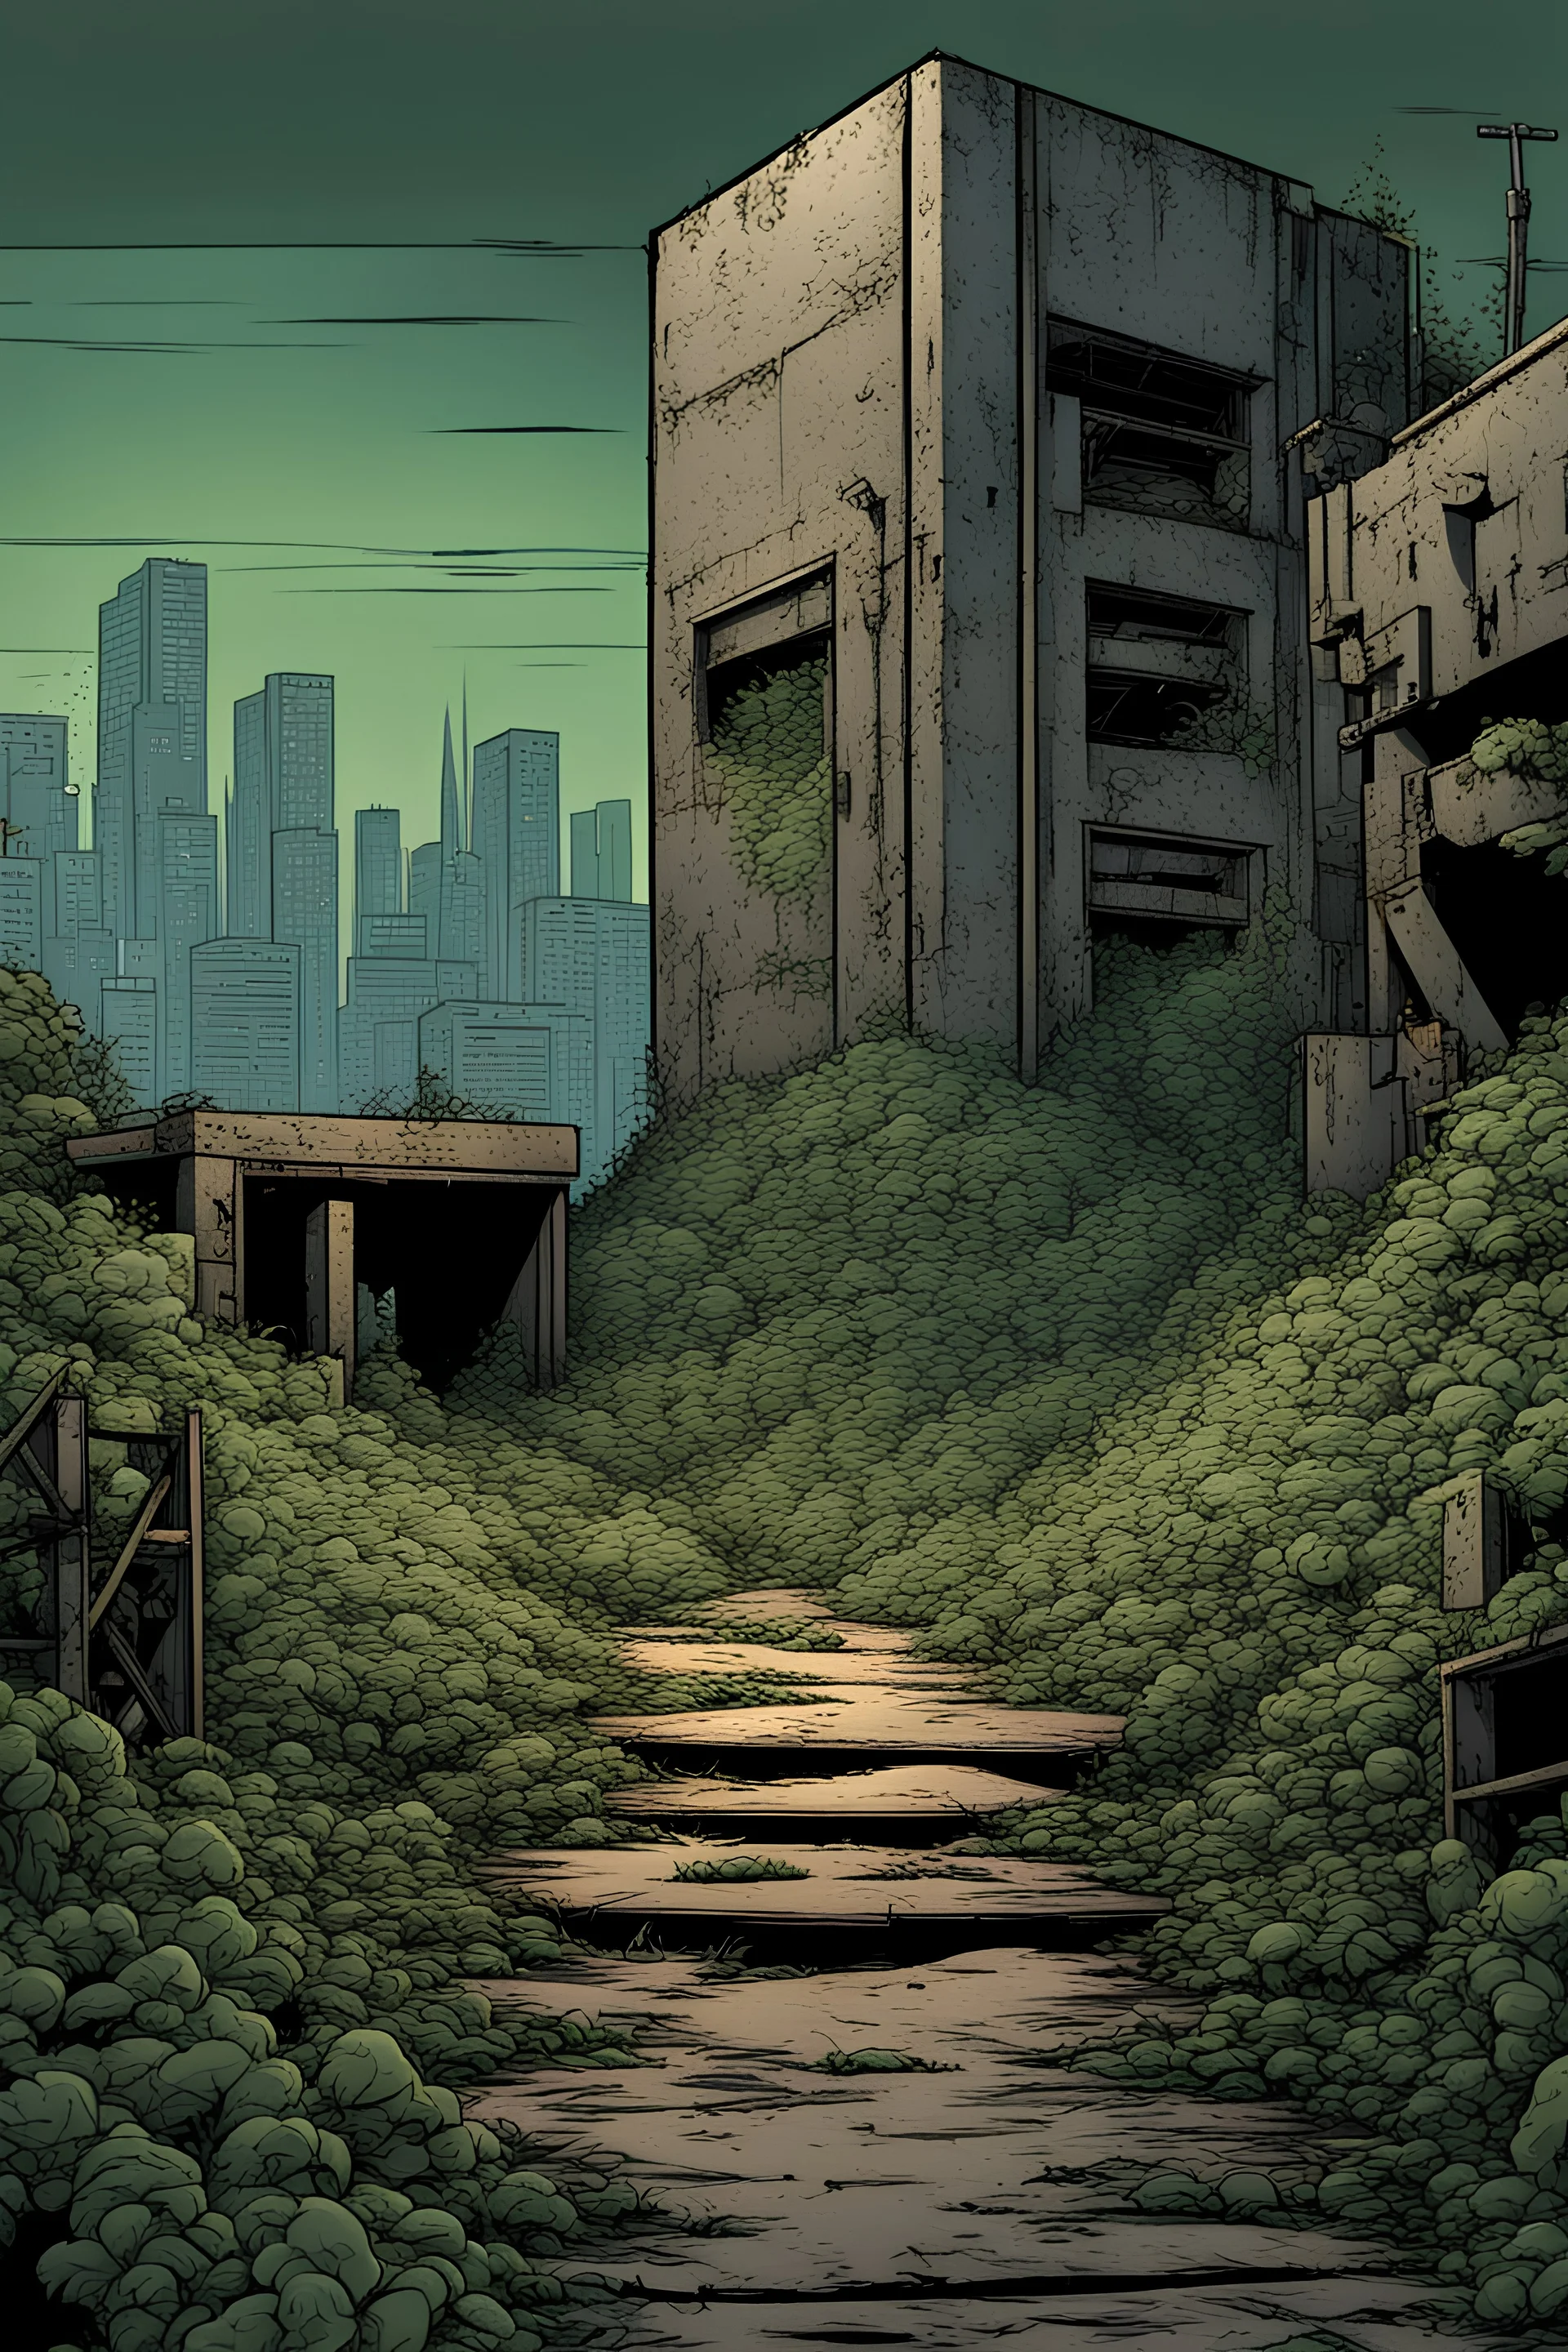 Bunker entrance on top of the ground, overgrown apocalyptic city background,comic art